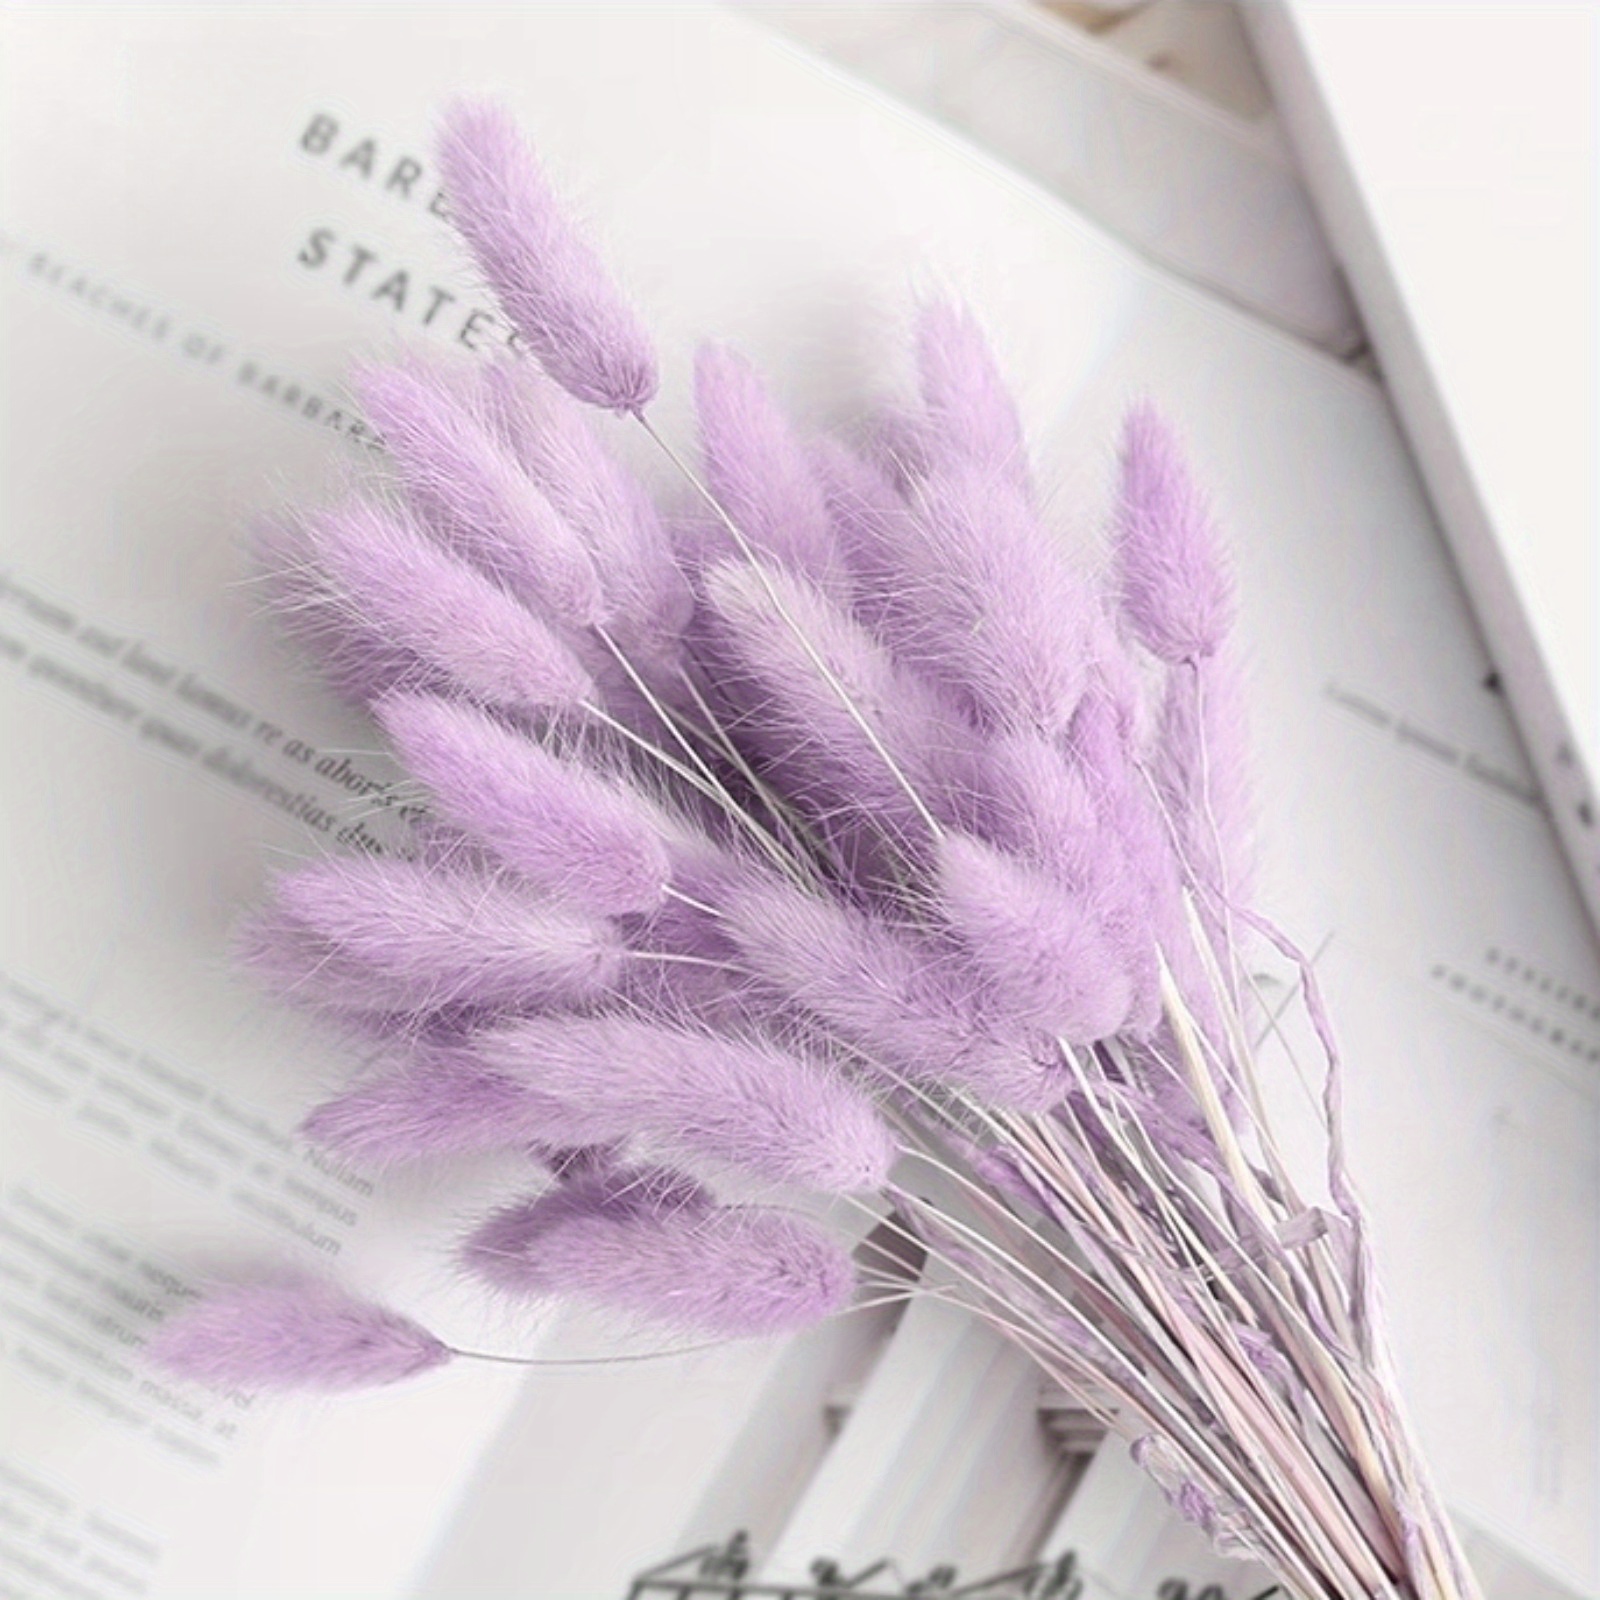 

Dried Lagurus Bunny Tails - Pink & Purple Decorative Grass In Bulk Piece (60/120/180/240 Pcs) For Crafts, Weddings, Showers - Natural Color, Pest-free